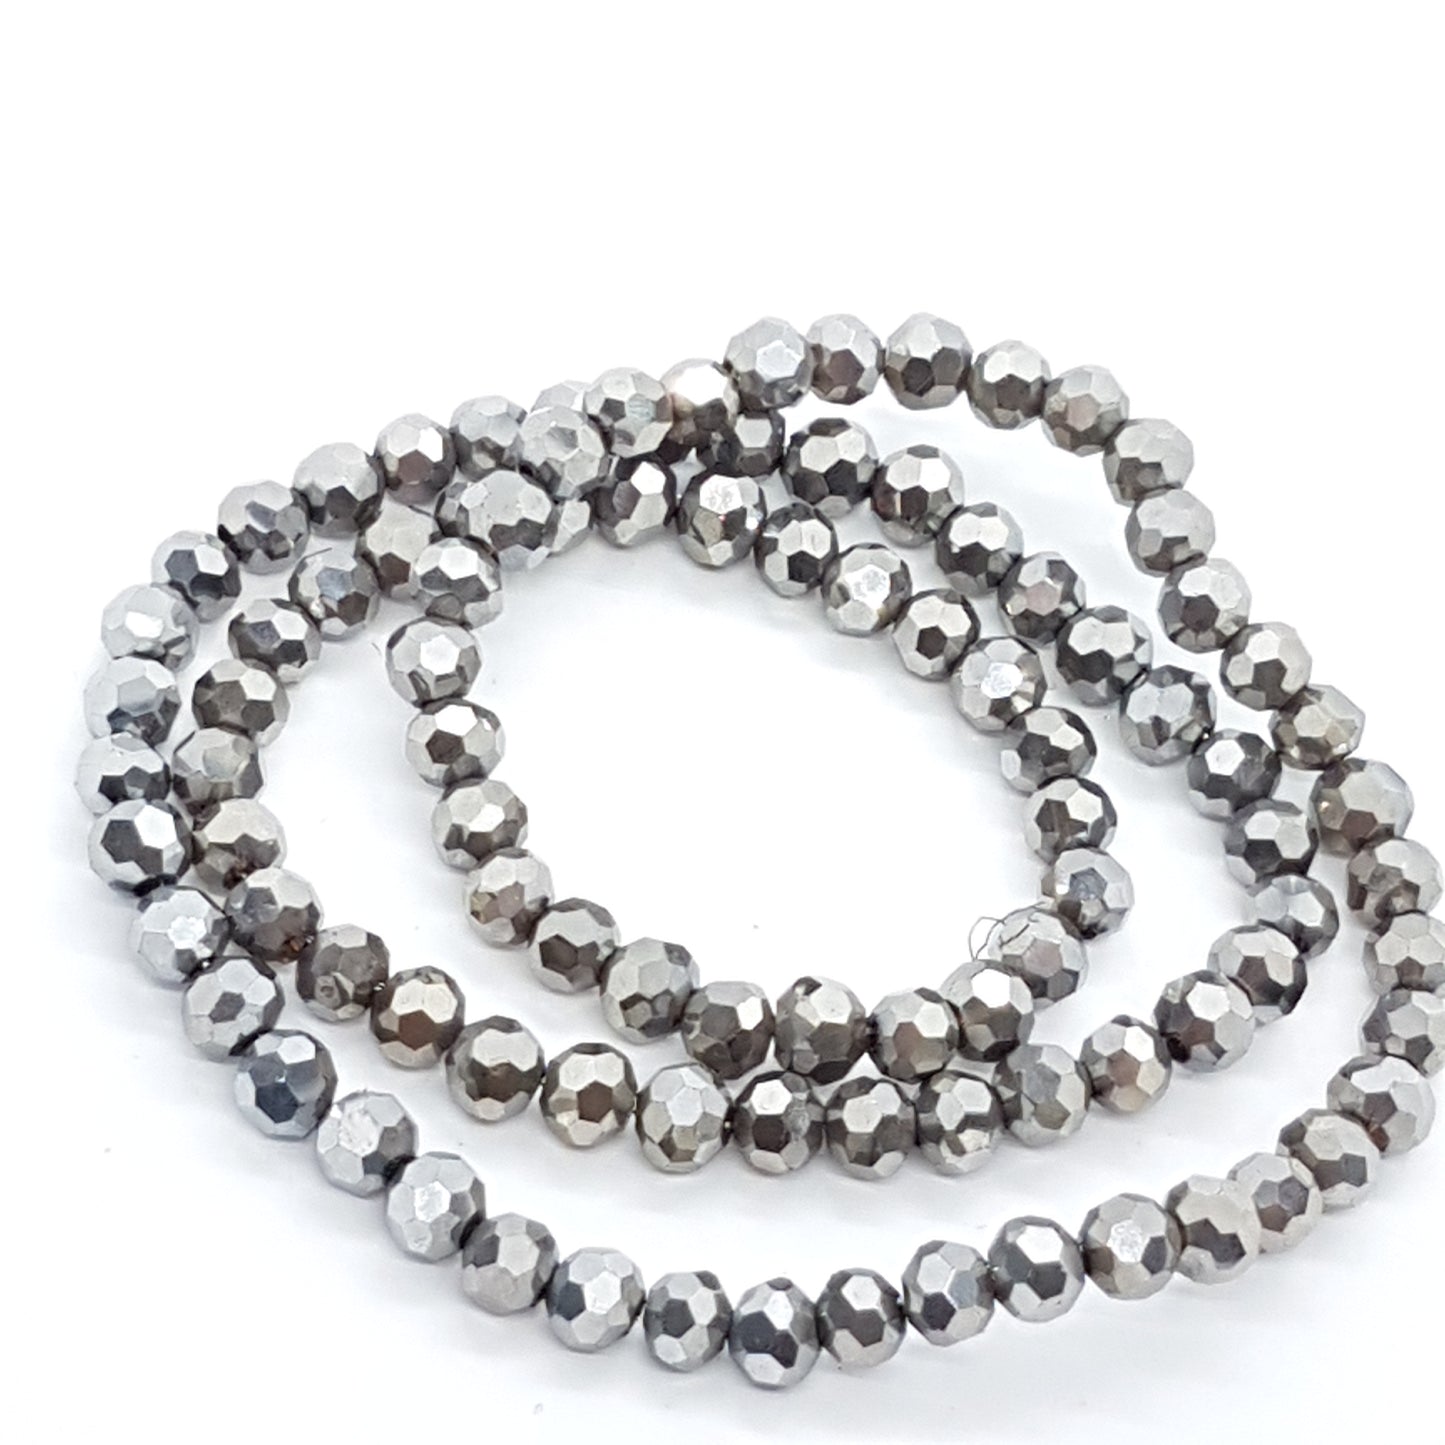 Metallic Silver Faceted Crystal Glass Beads